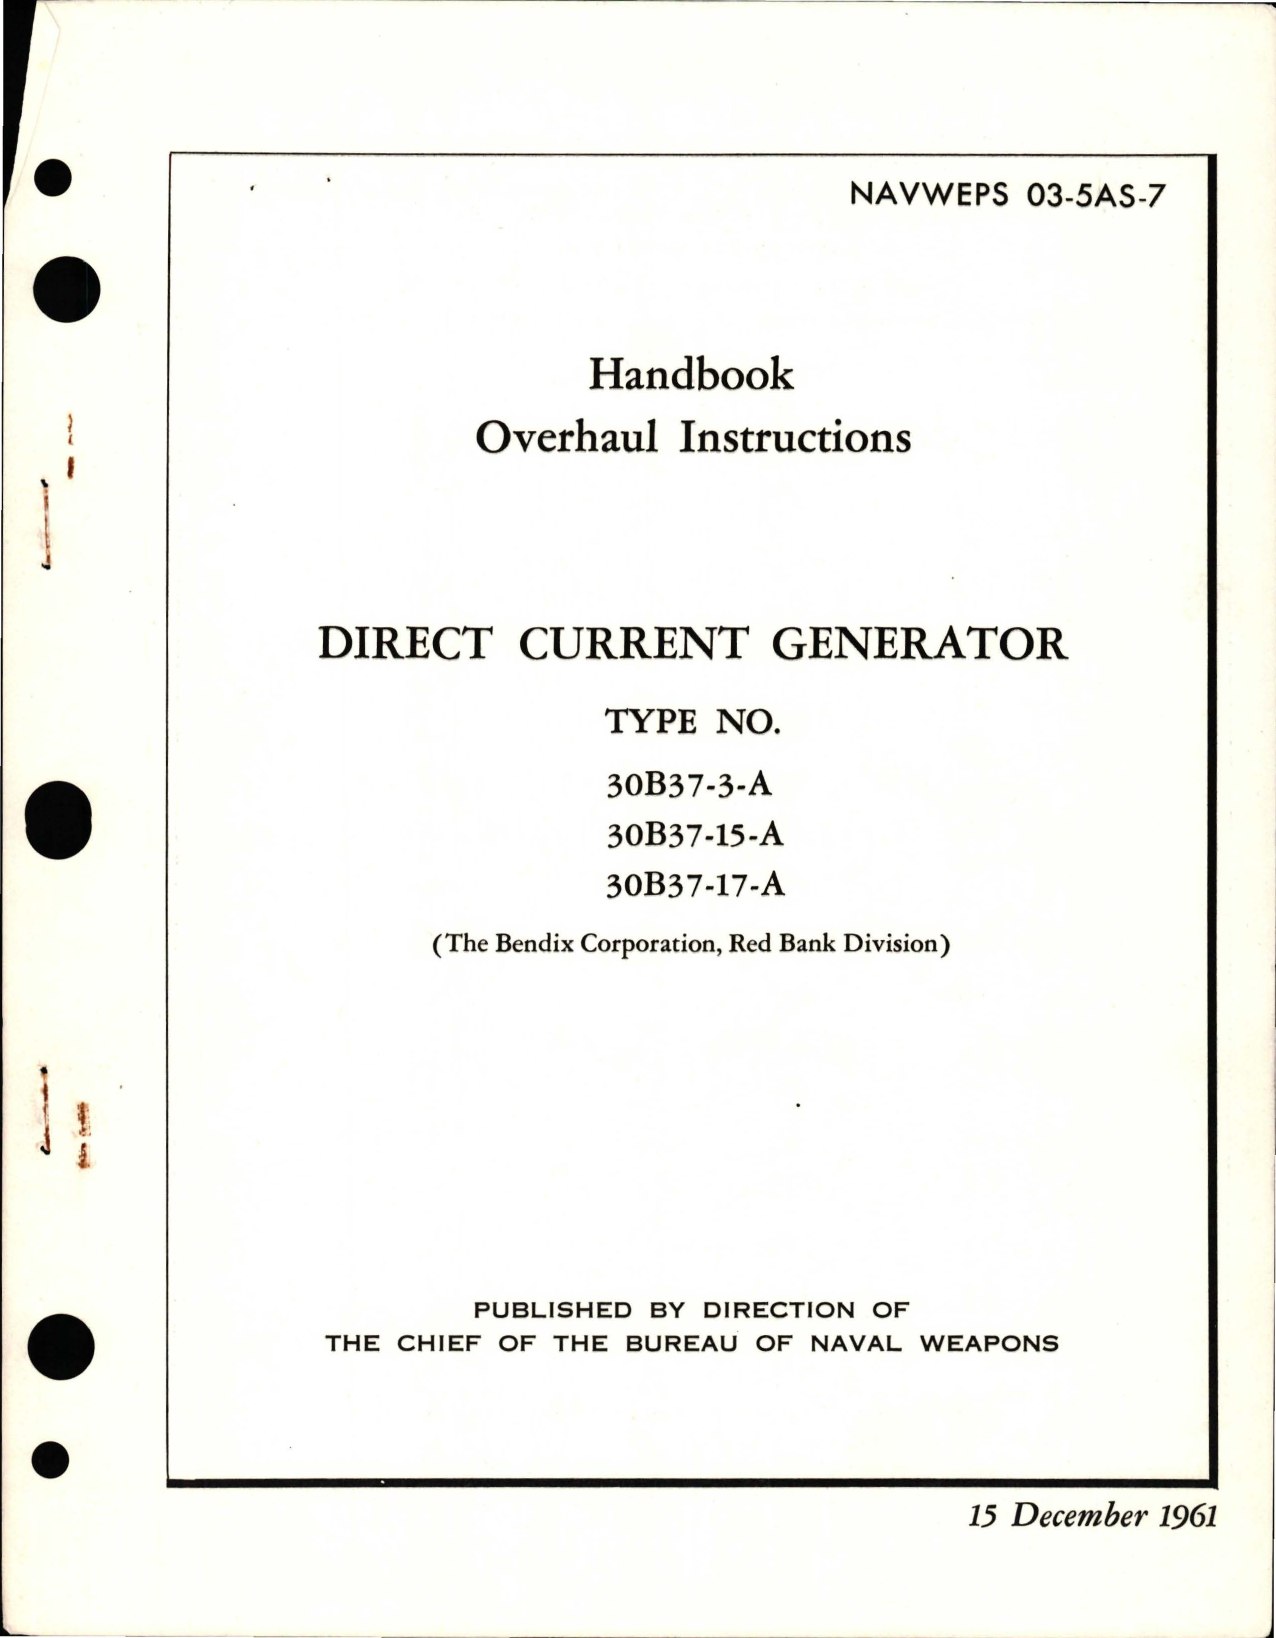 Sample page 1 from AirCorps Library document: Overhaul Instructions for Direct Current Generator (Starter Generator) Types 30B37-3-A, 30B37-15-A, 30B37-17-A